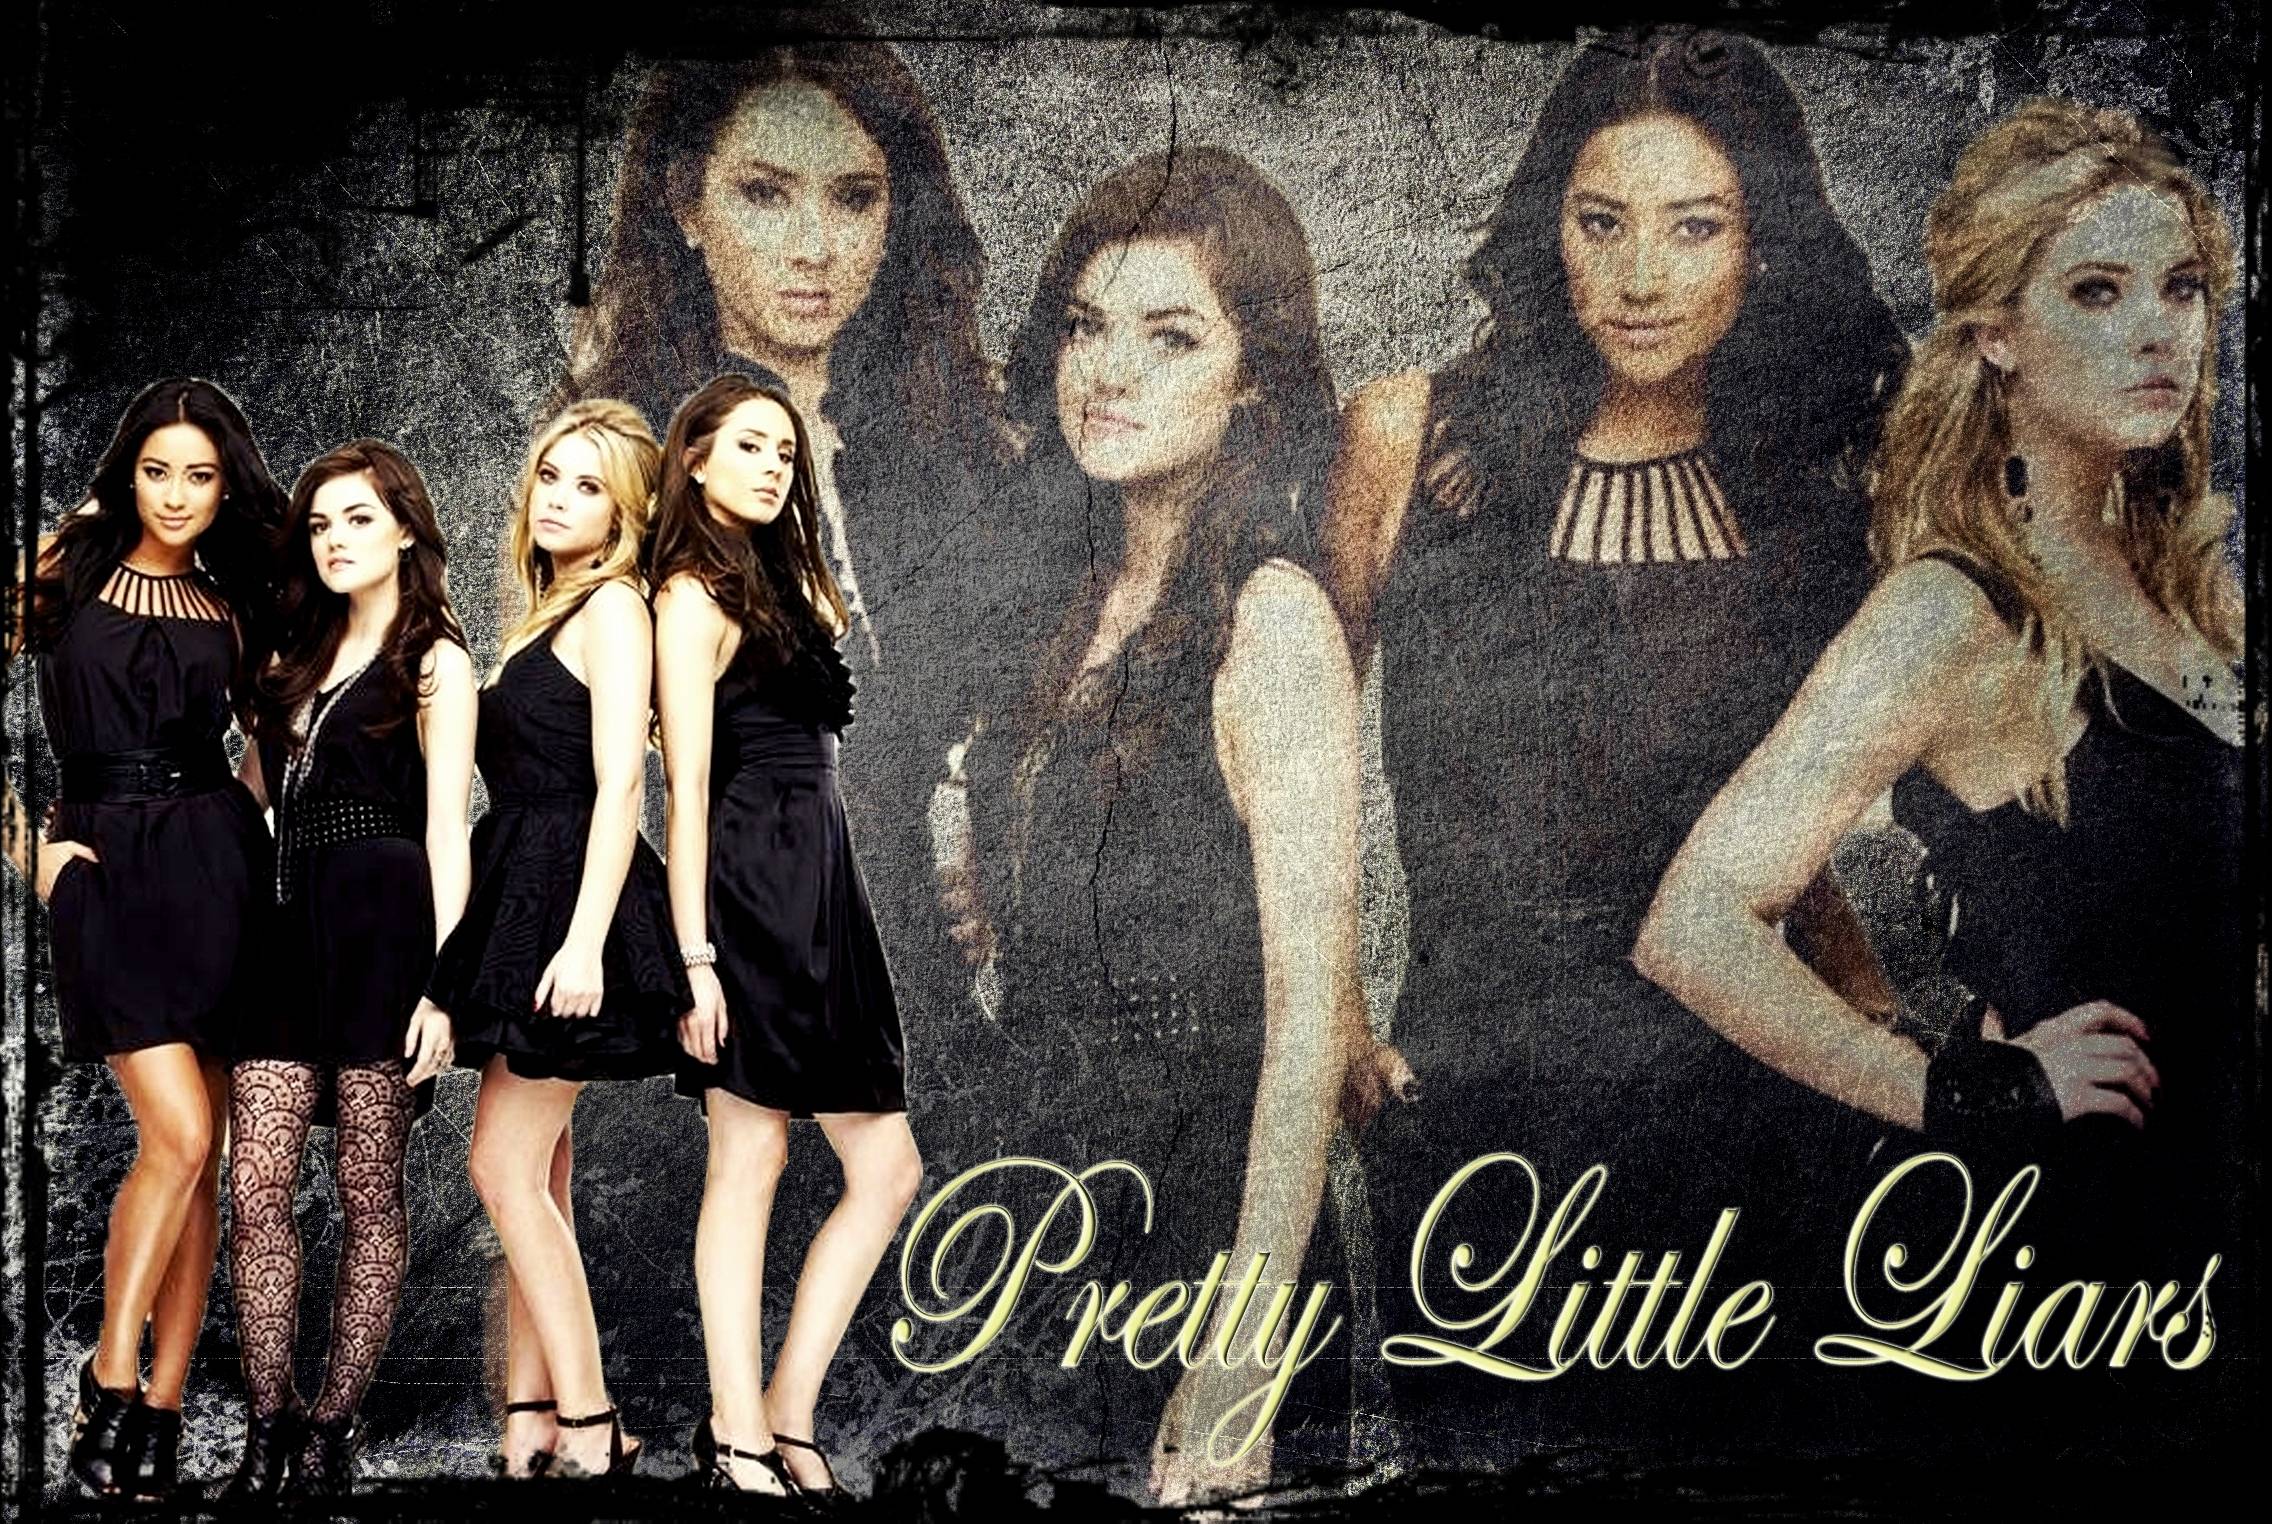 Pretty Little Liars Wallpapers 6 23432 Image HD Wallpapers